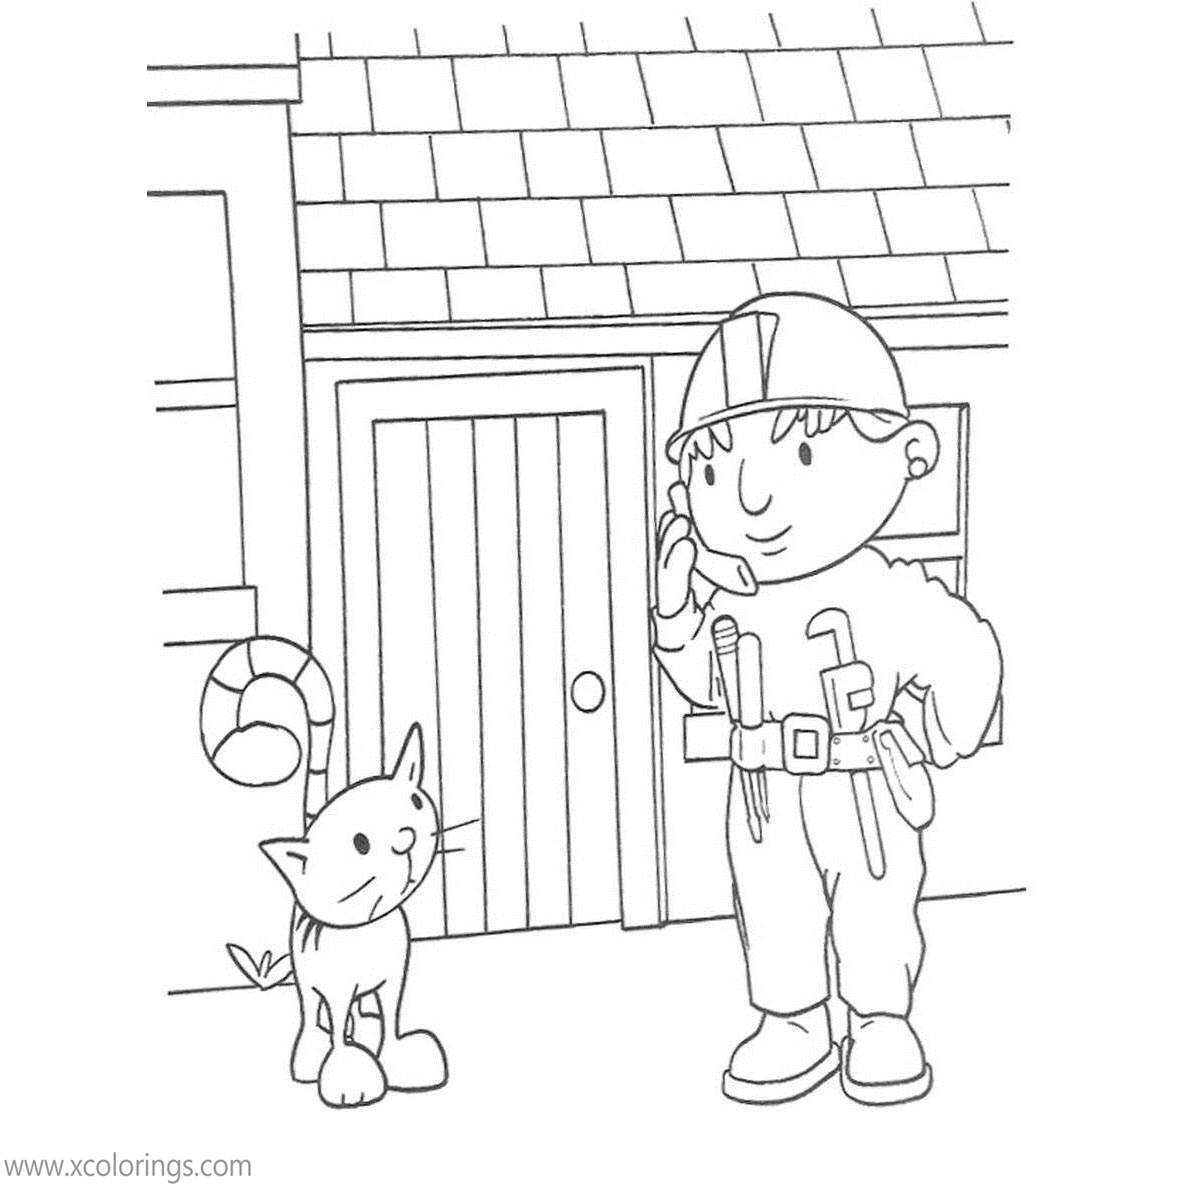 Free Bob The Builder Coloring Pages Bob Taking a Phone printable